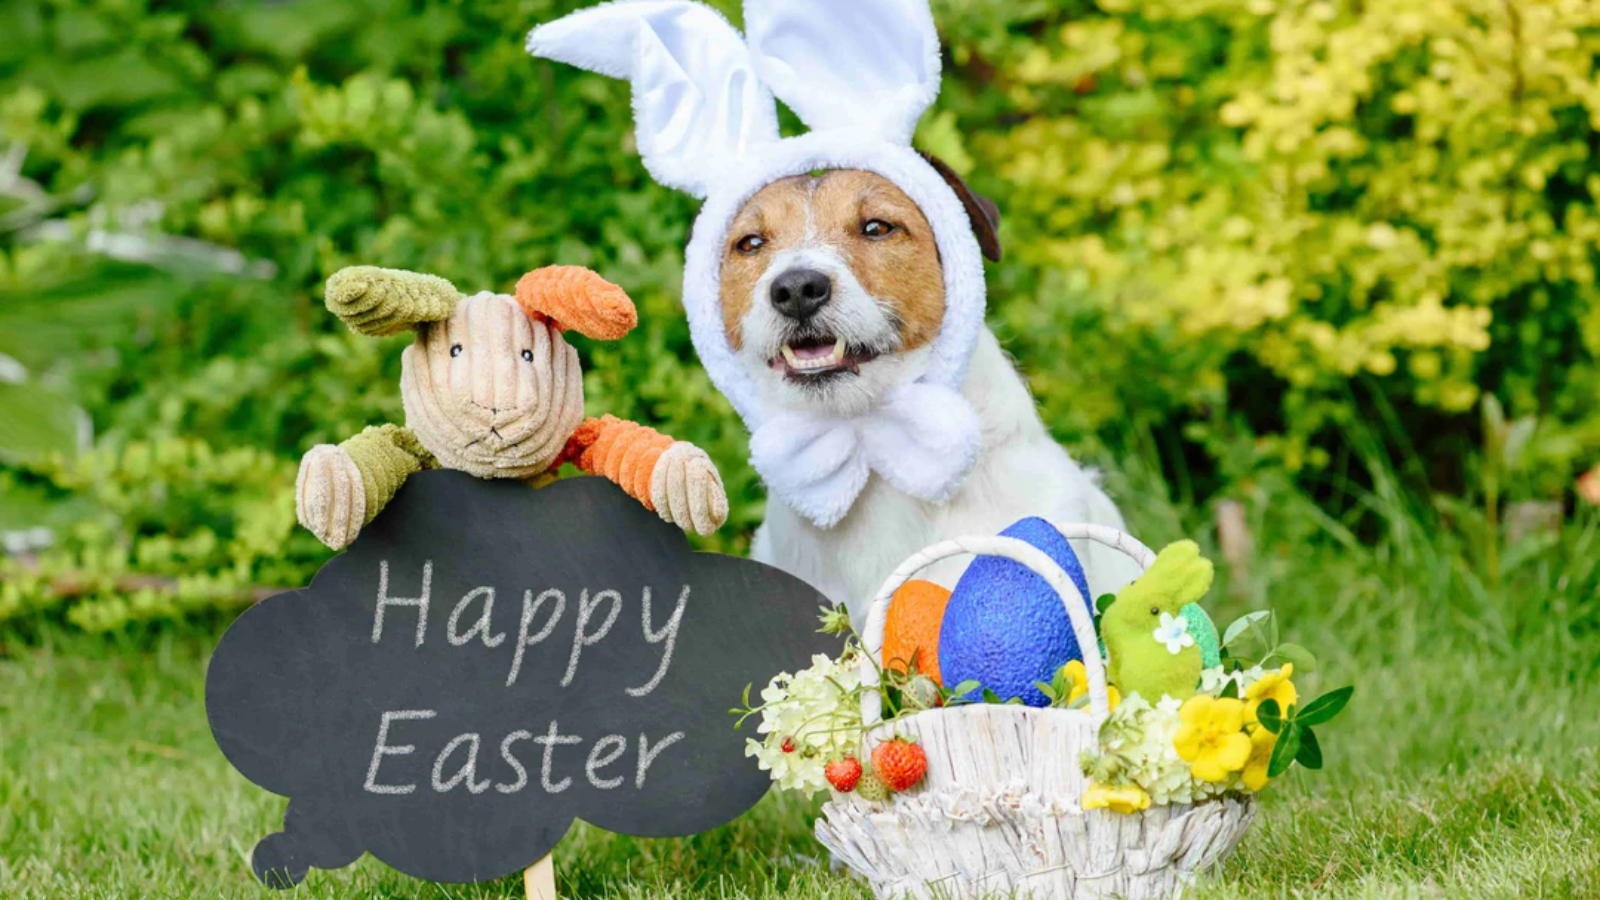 Egg-cellent Ways to Include Your Dog in Easter